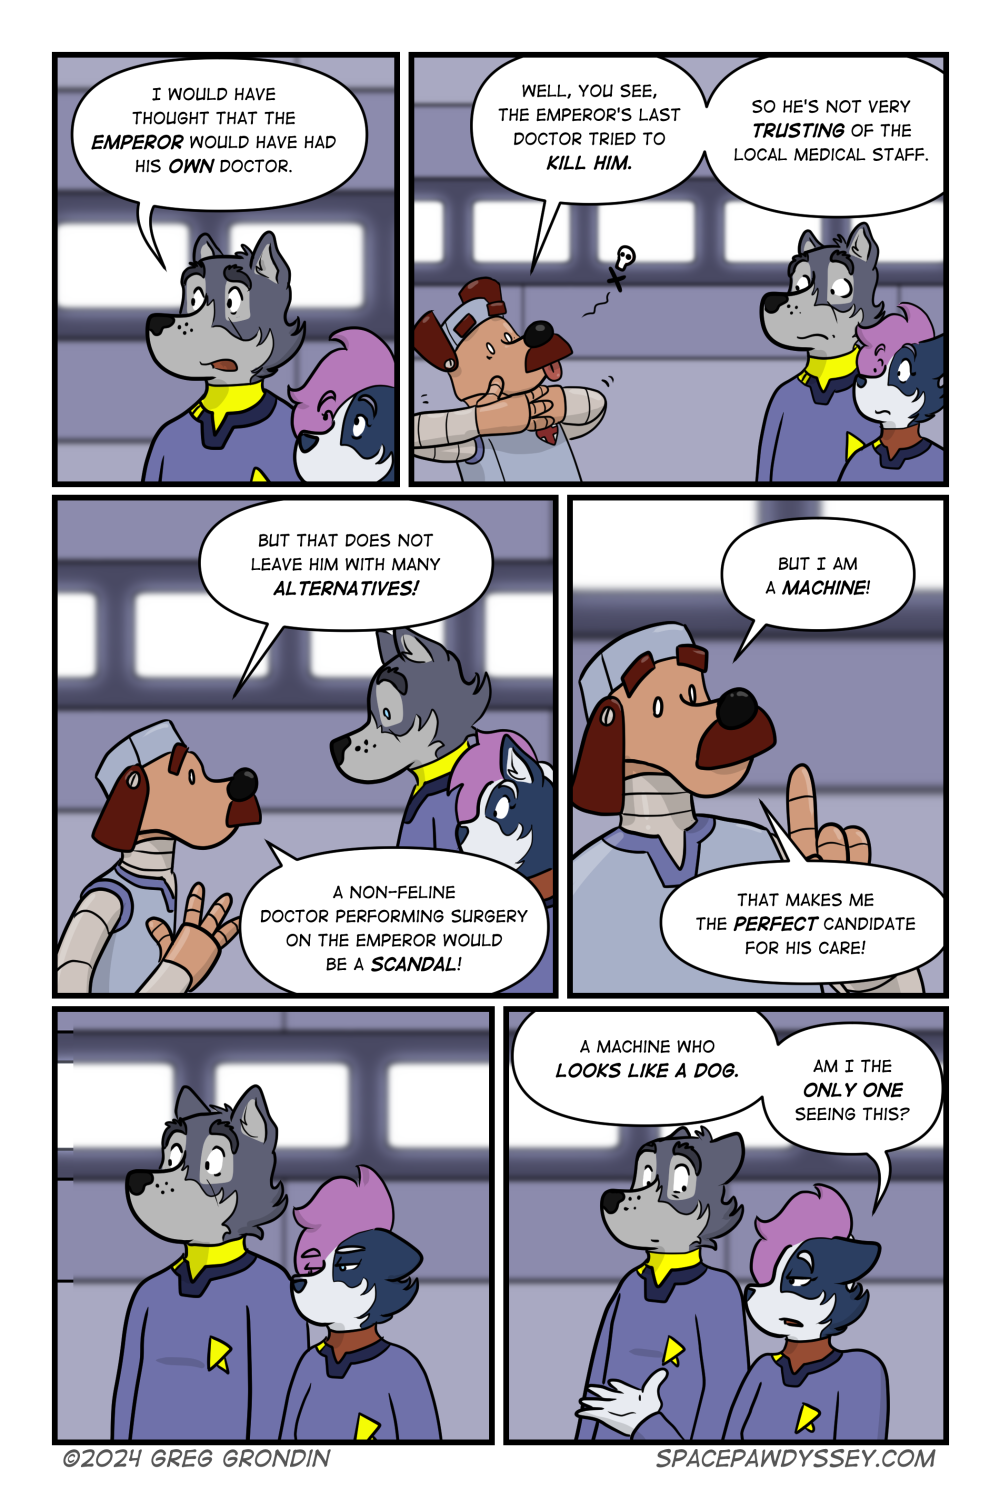 Space Pawdyssey #660